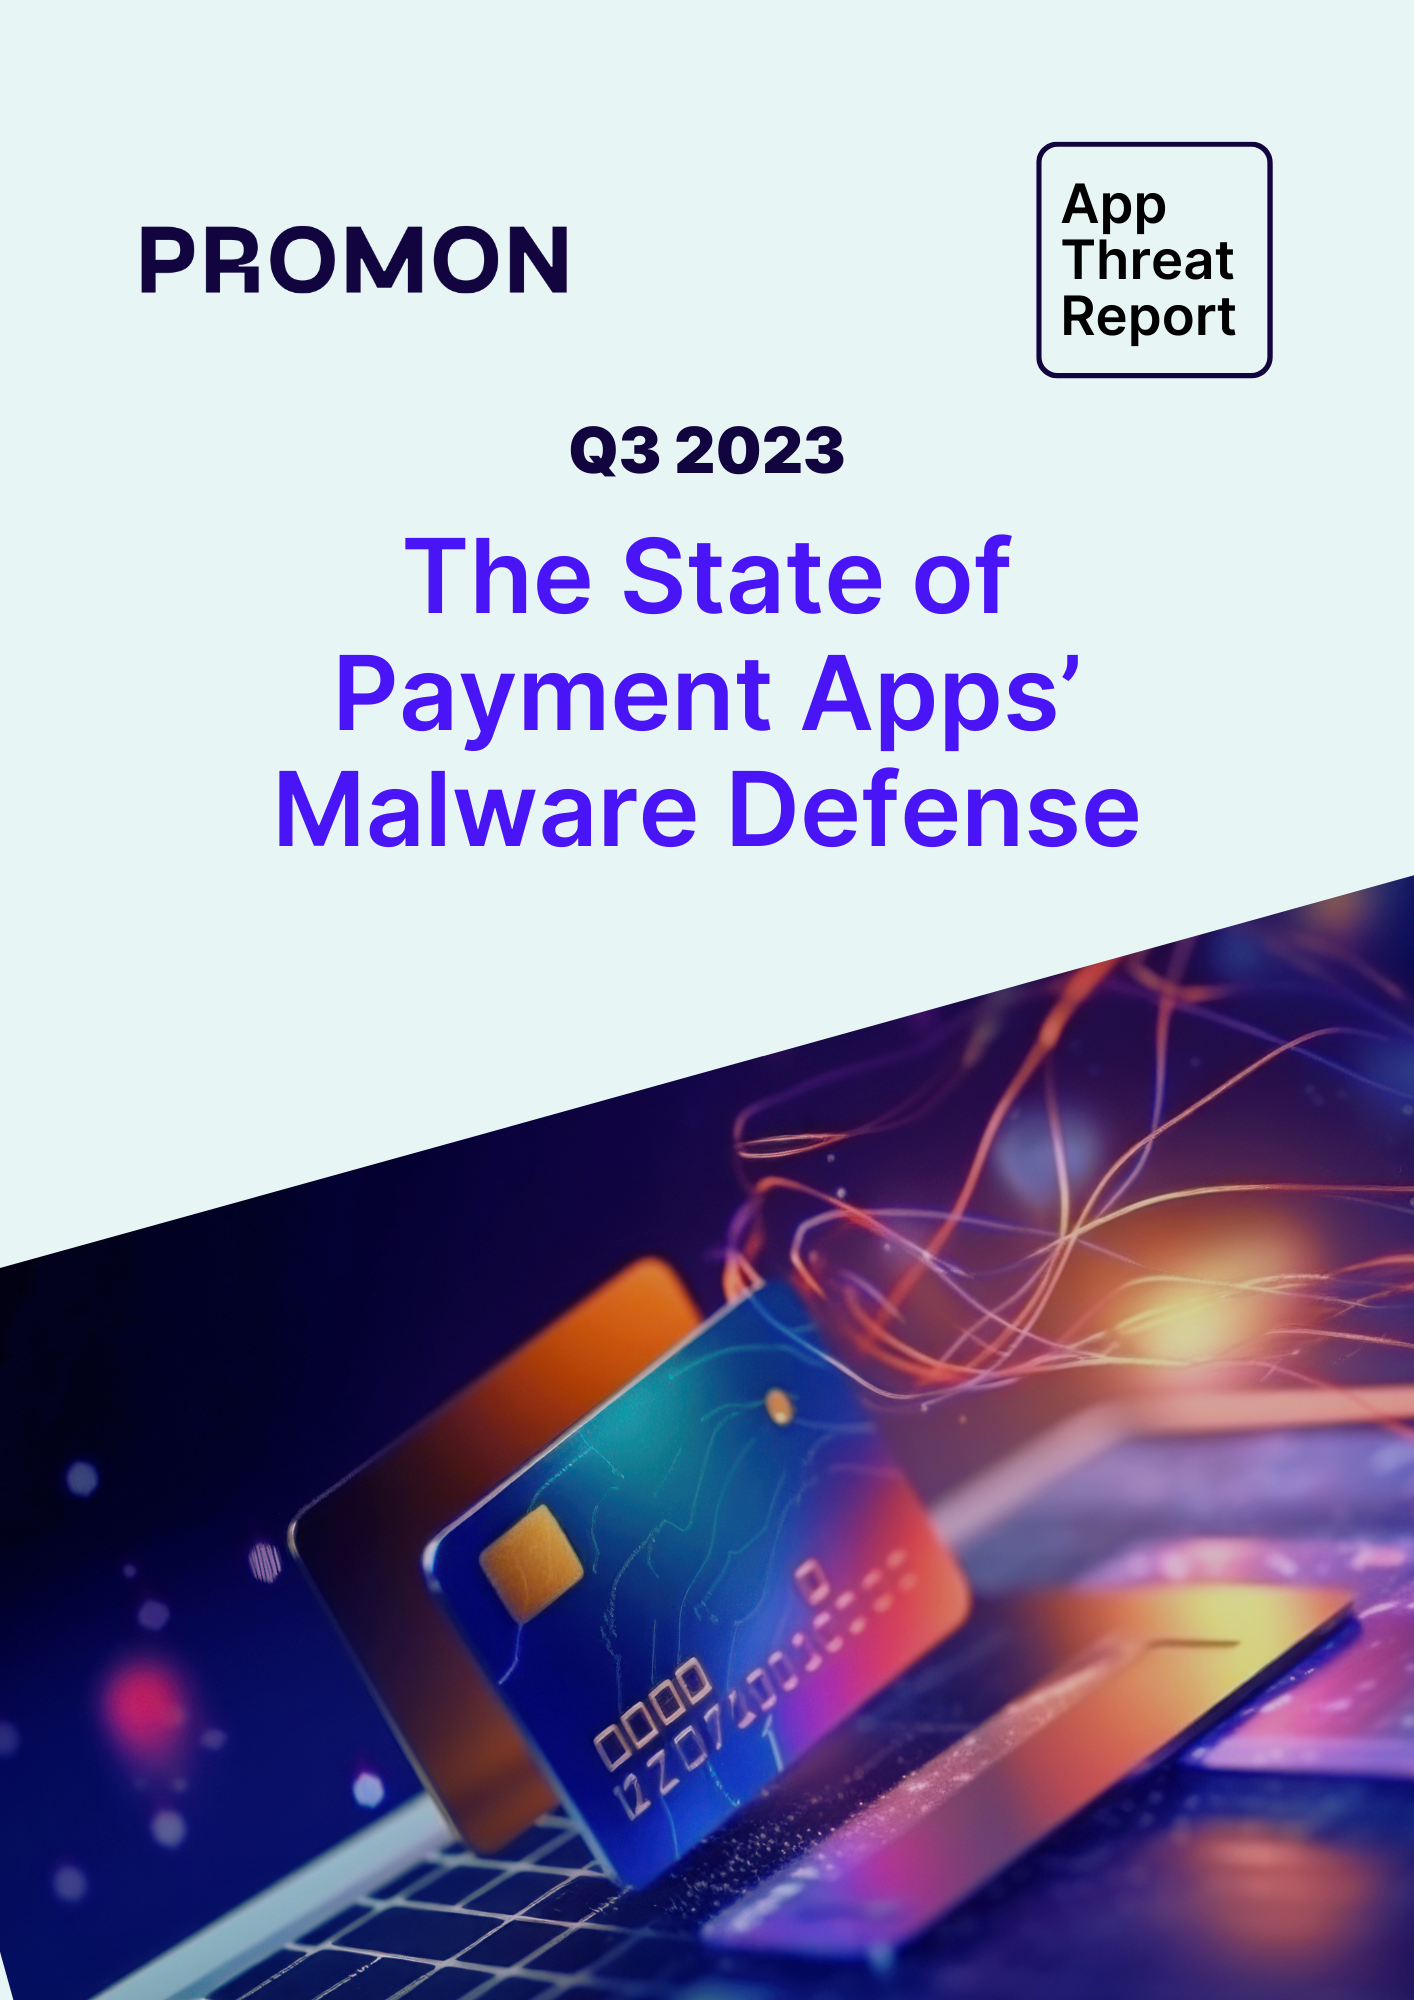 The State of Payment Apps’ Malware Defense